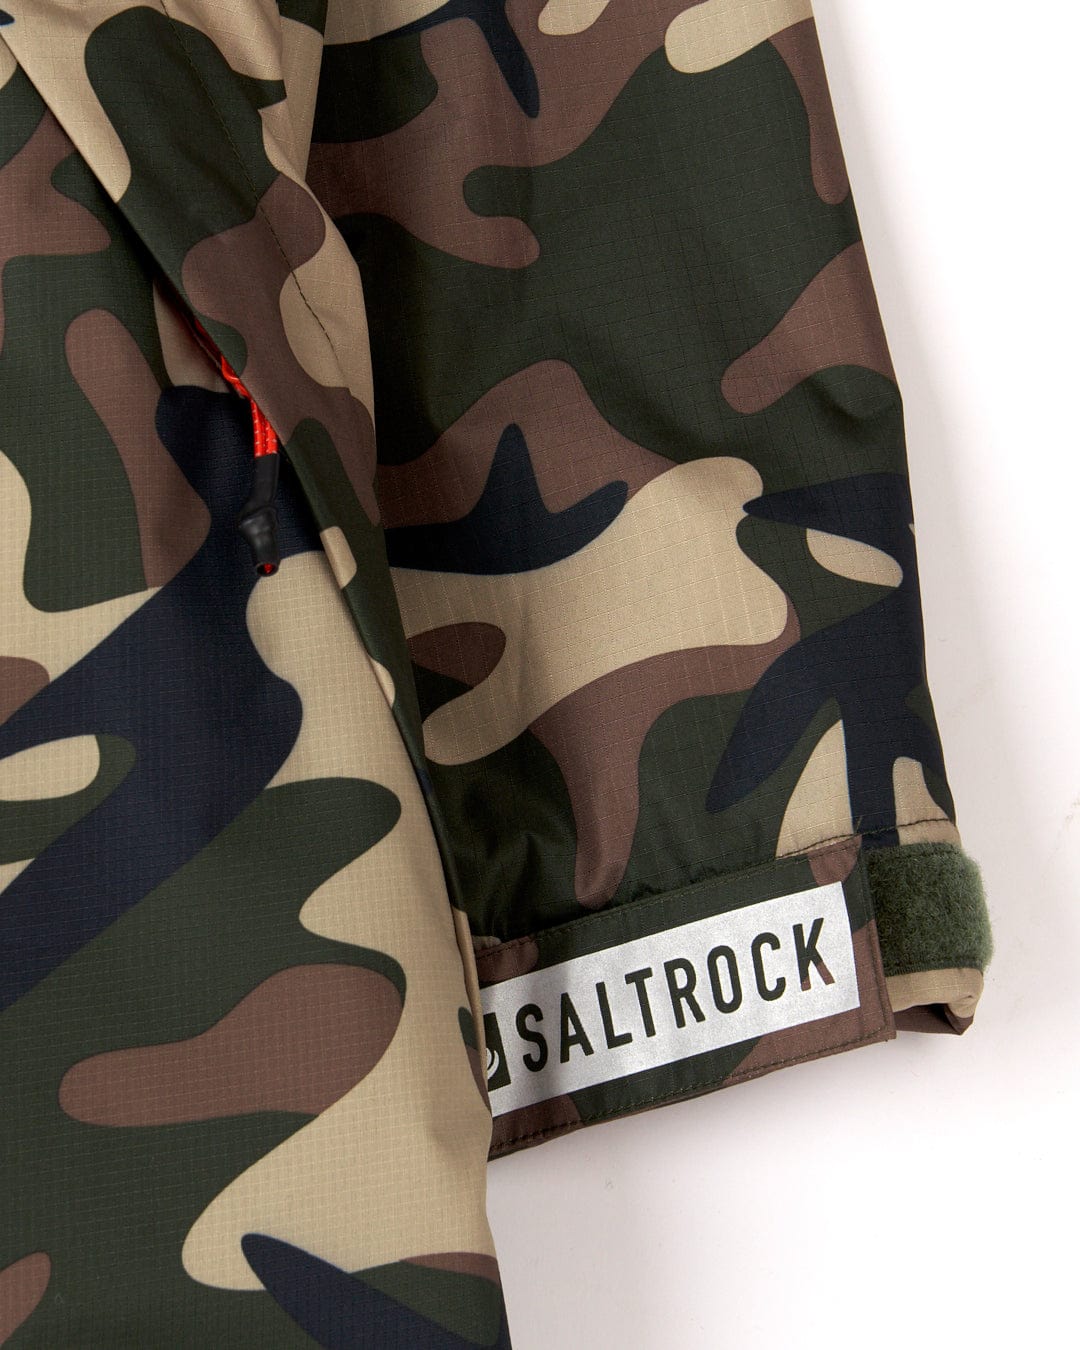 Close-up of a camouflage fabric with a Saltrock brand tag on a Recycled Four Seasons Changing Robe in Brown Camo.